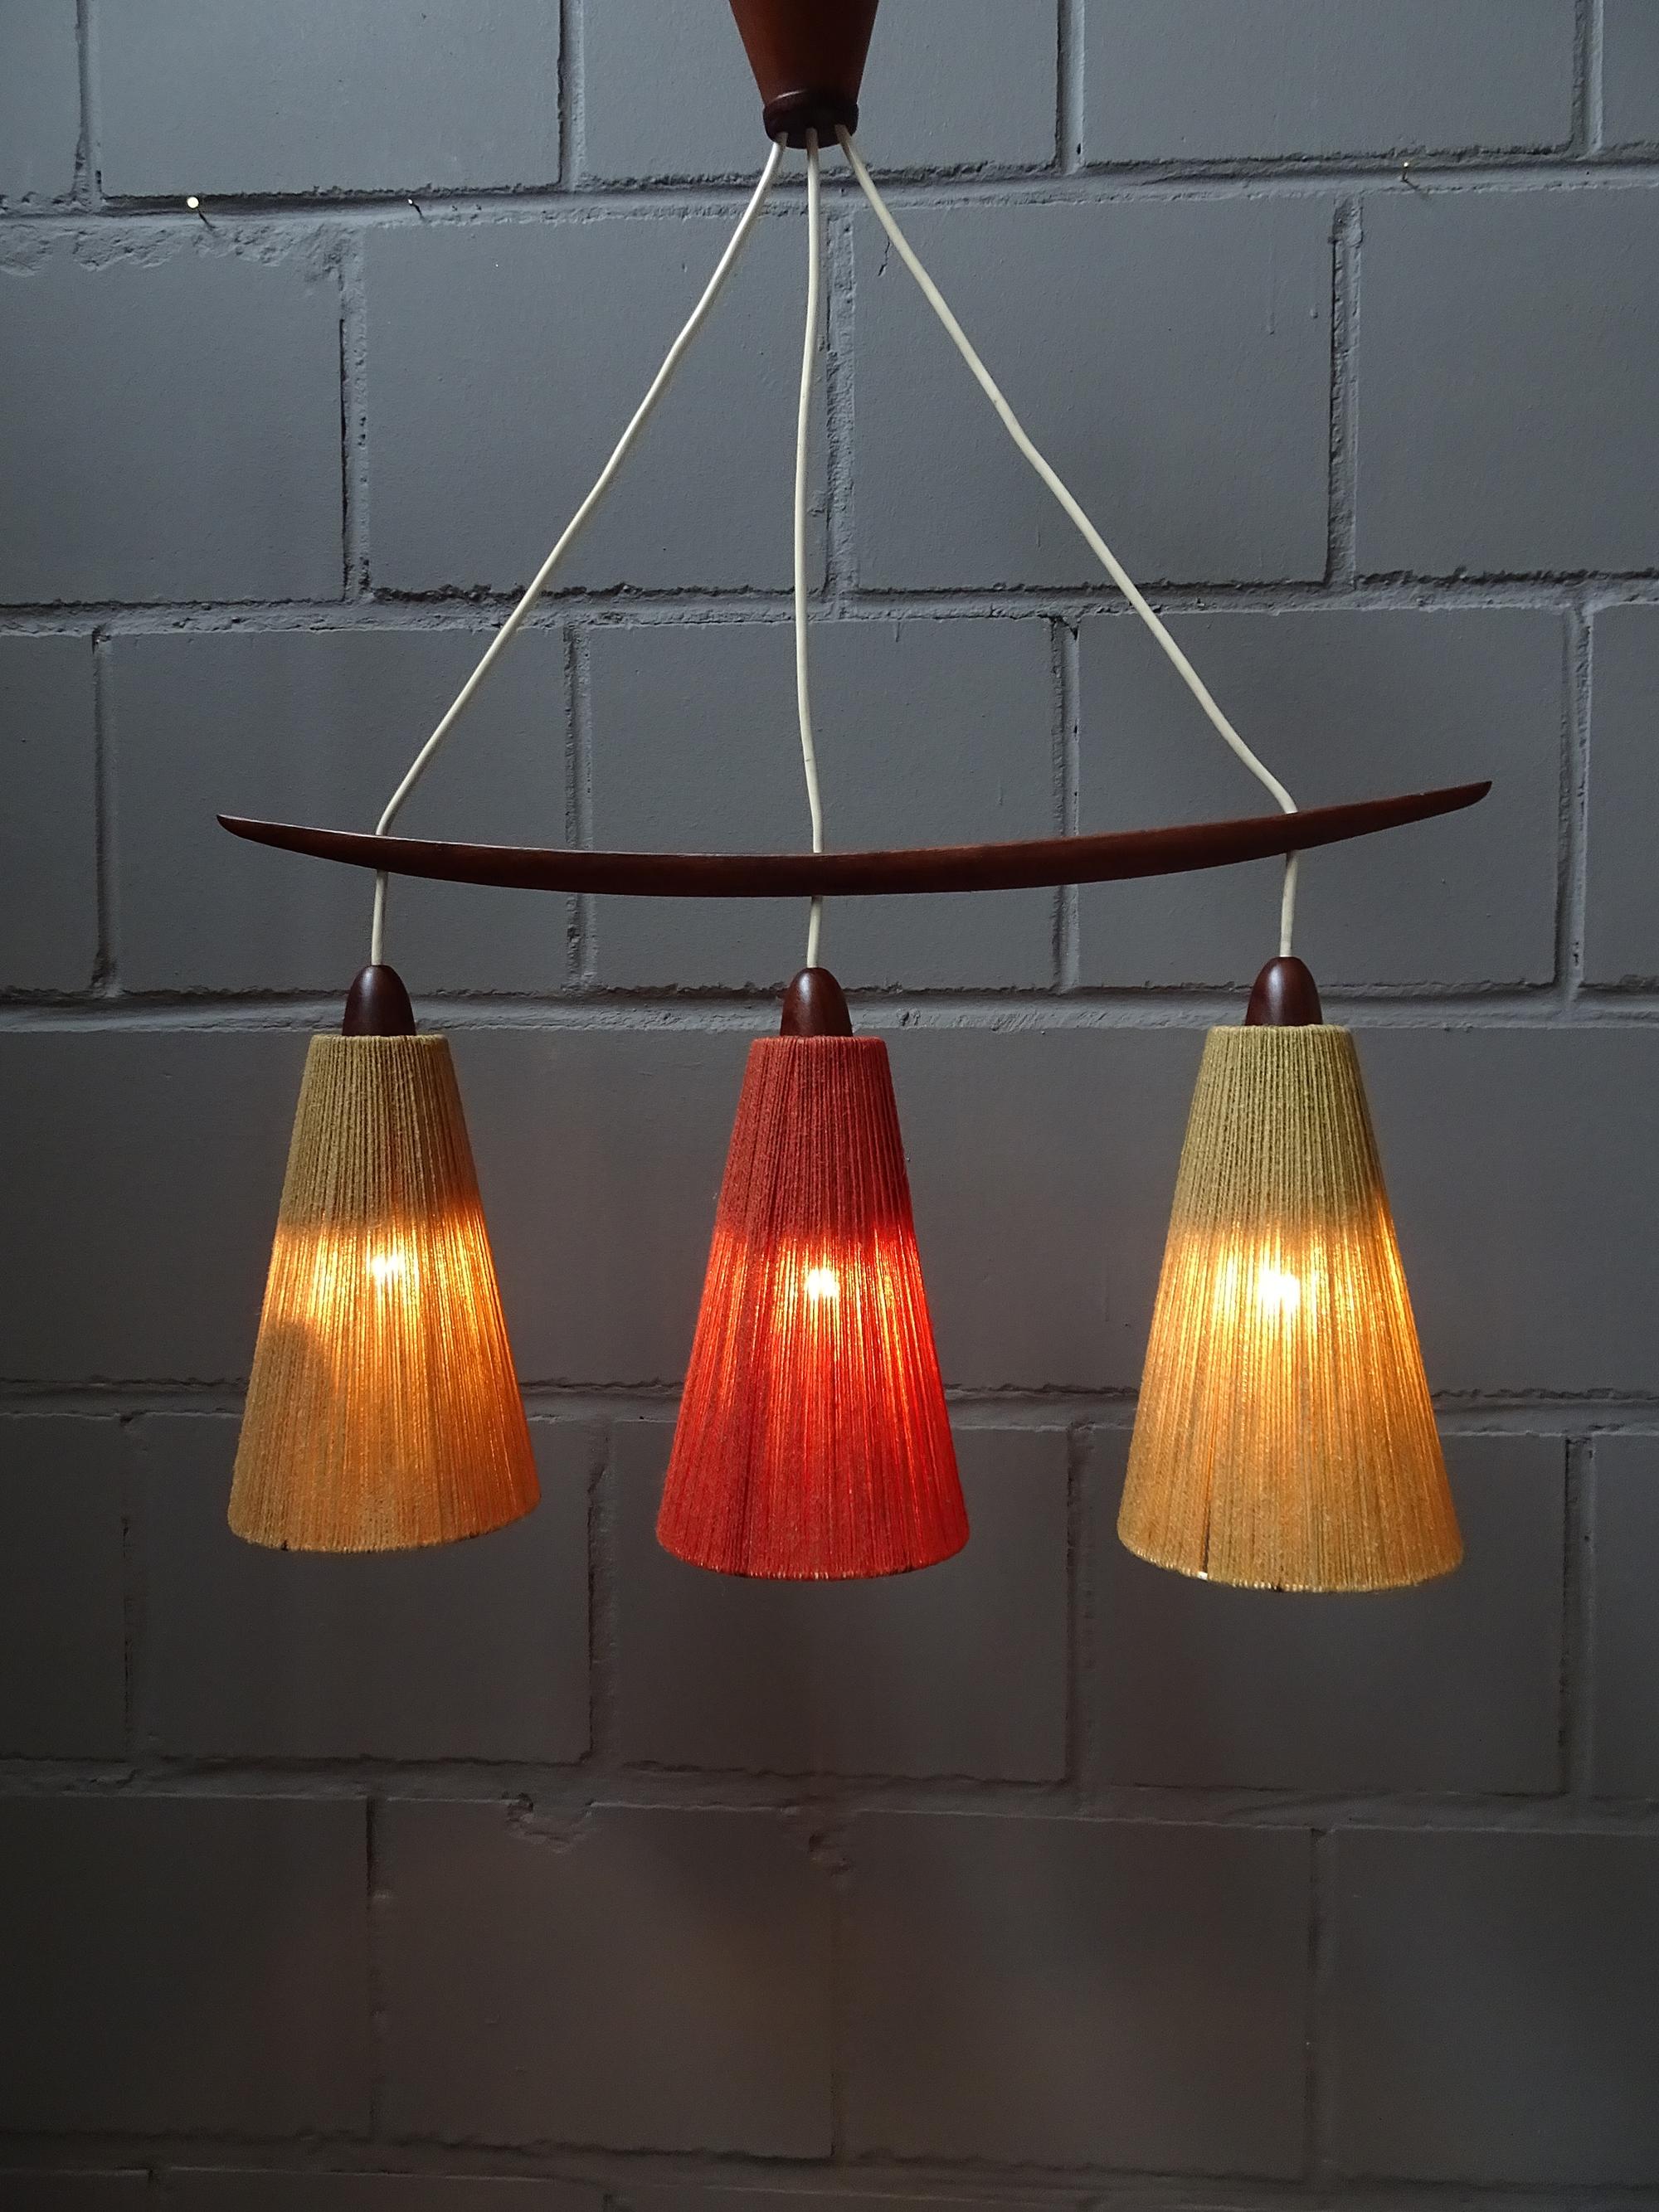 Mid-Century Modern Midcentury Teak and Cord Shade Chandelier by Temde, Germany, 1960 For Sale